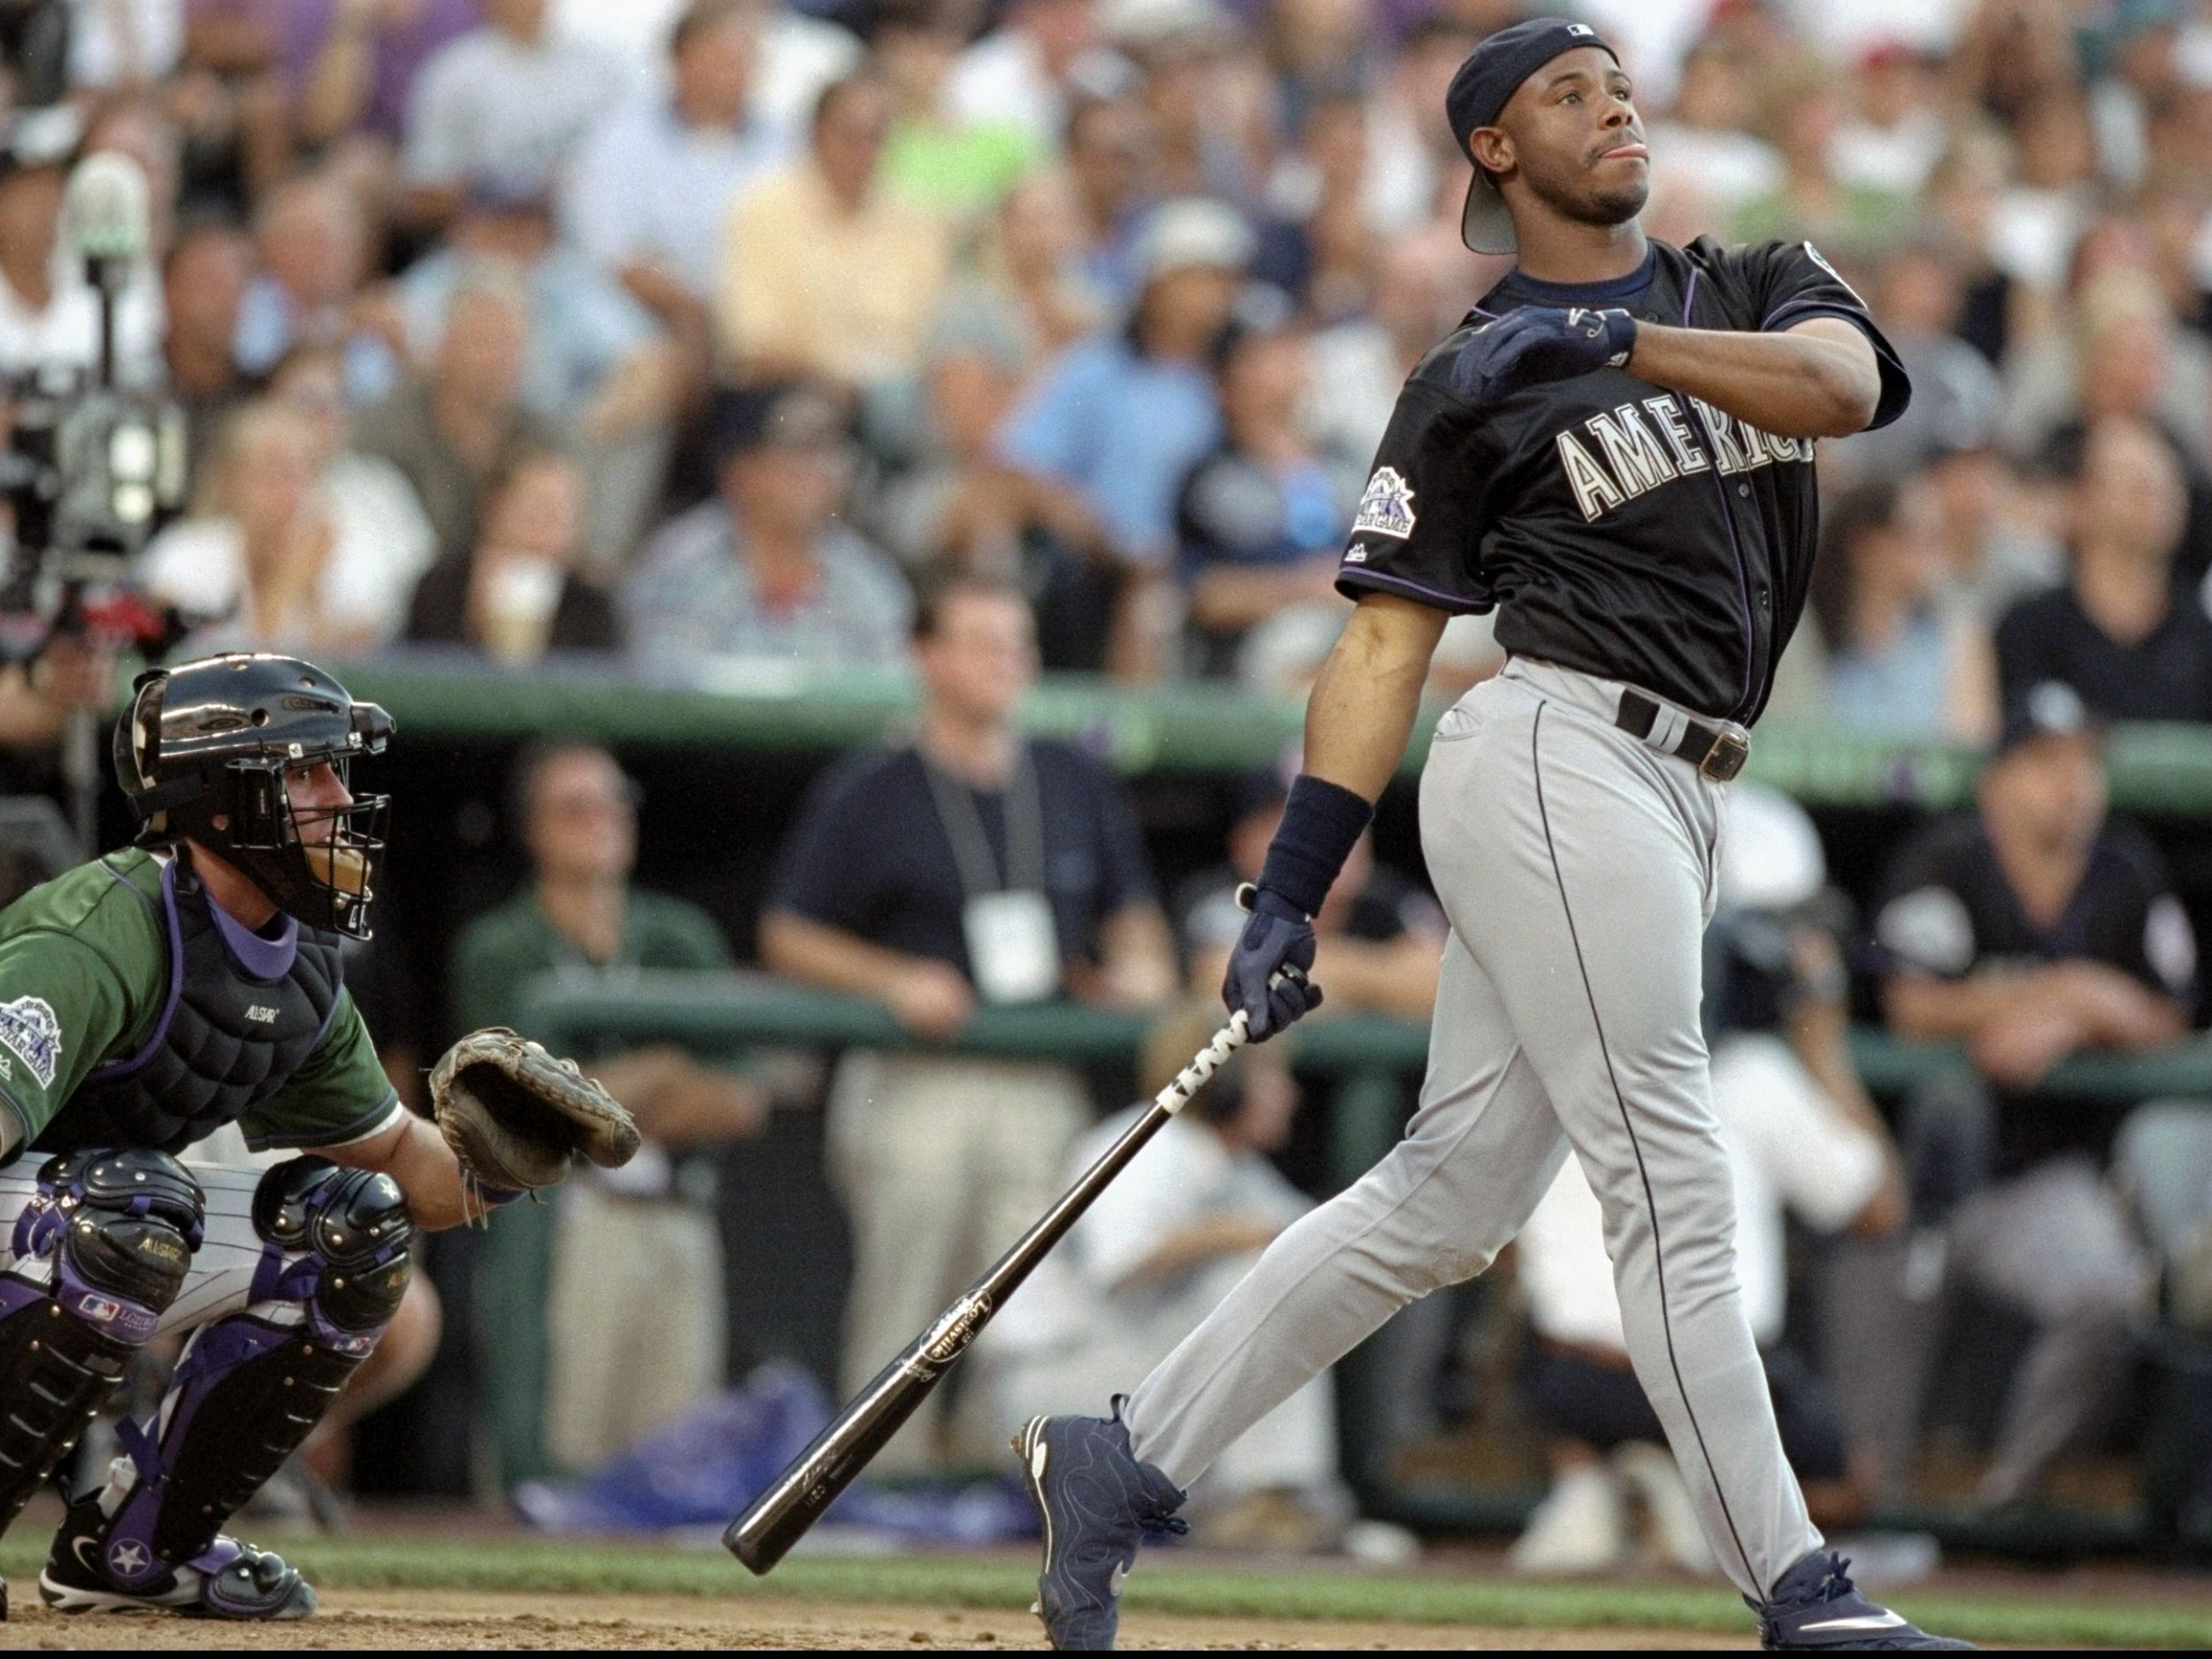 Mariners have left their mark on Home Run Derby — good and bad